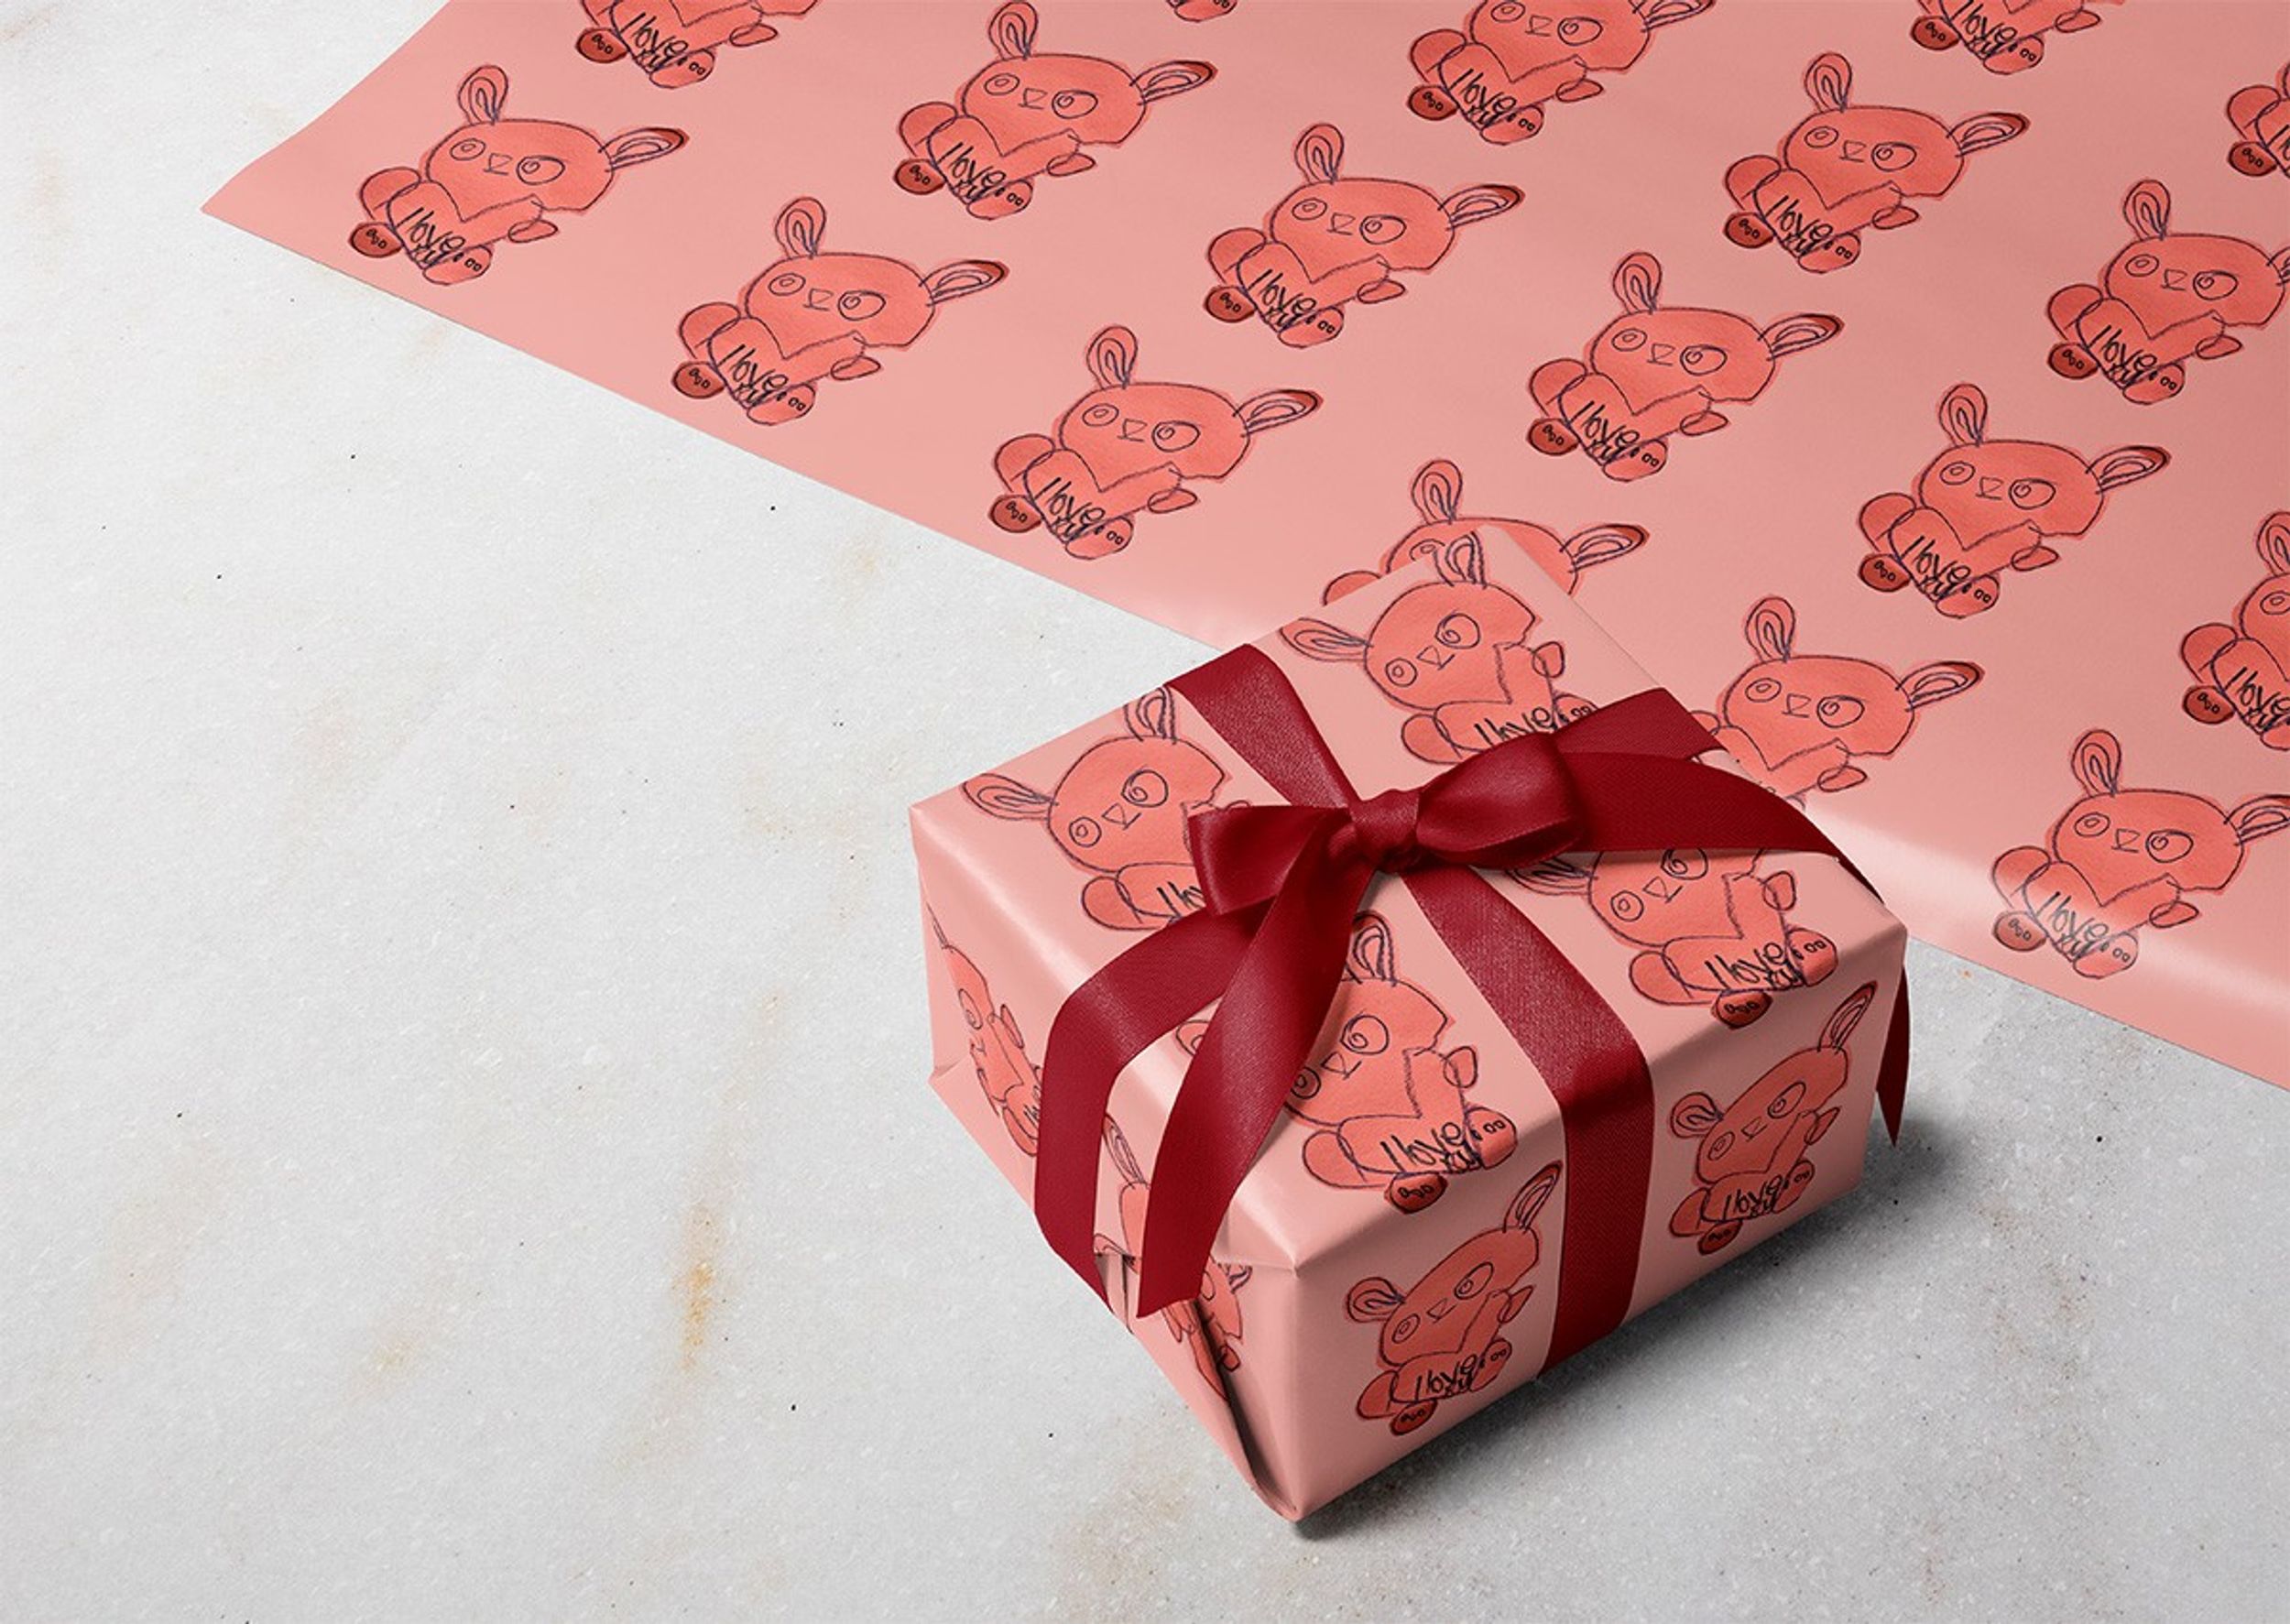 Thumbnail: Scribble gift wrap shown with a wrapped present and the original photo